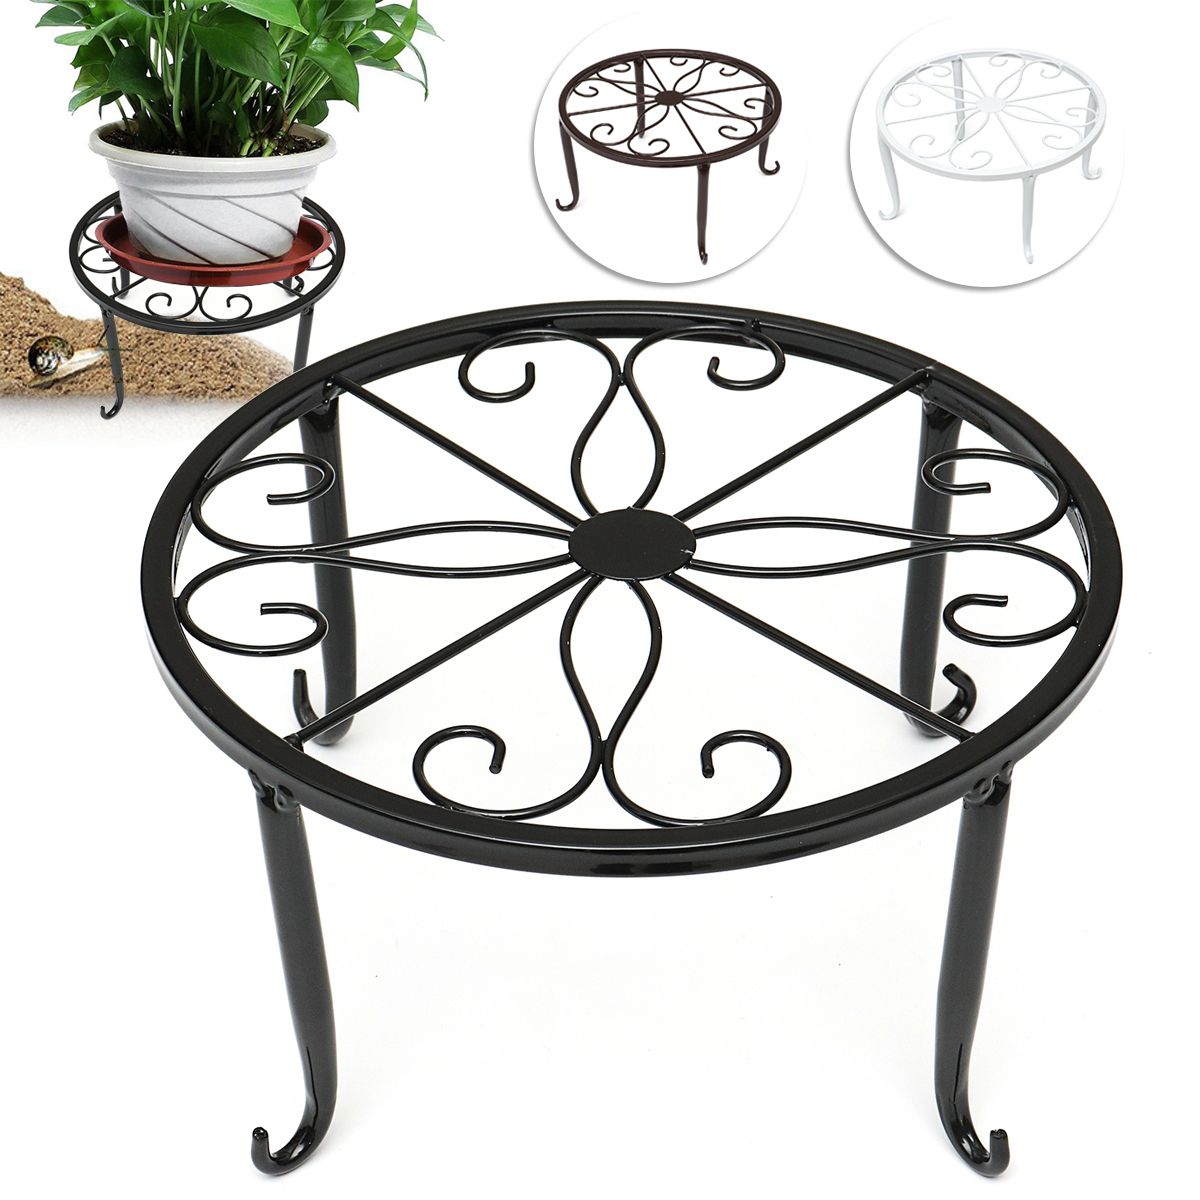 Newest Iron Base Plant Stands Throughout Wrought Iron Pot Plant Stand Flower Shelf Indoor Outdoor Garden Decor  24*24*13cm – Walmart (View 9 of 15)